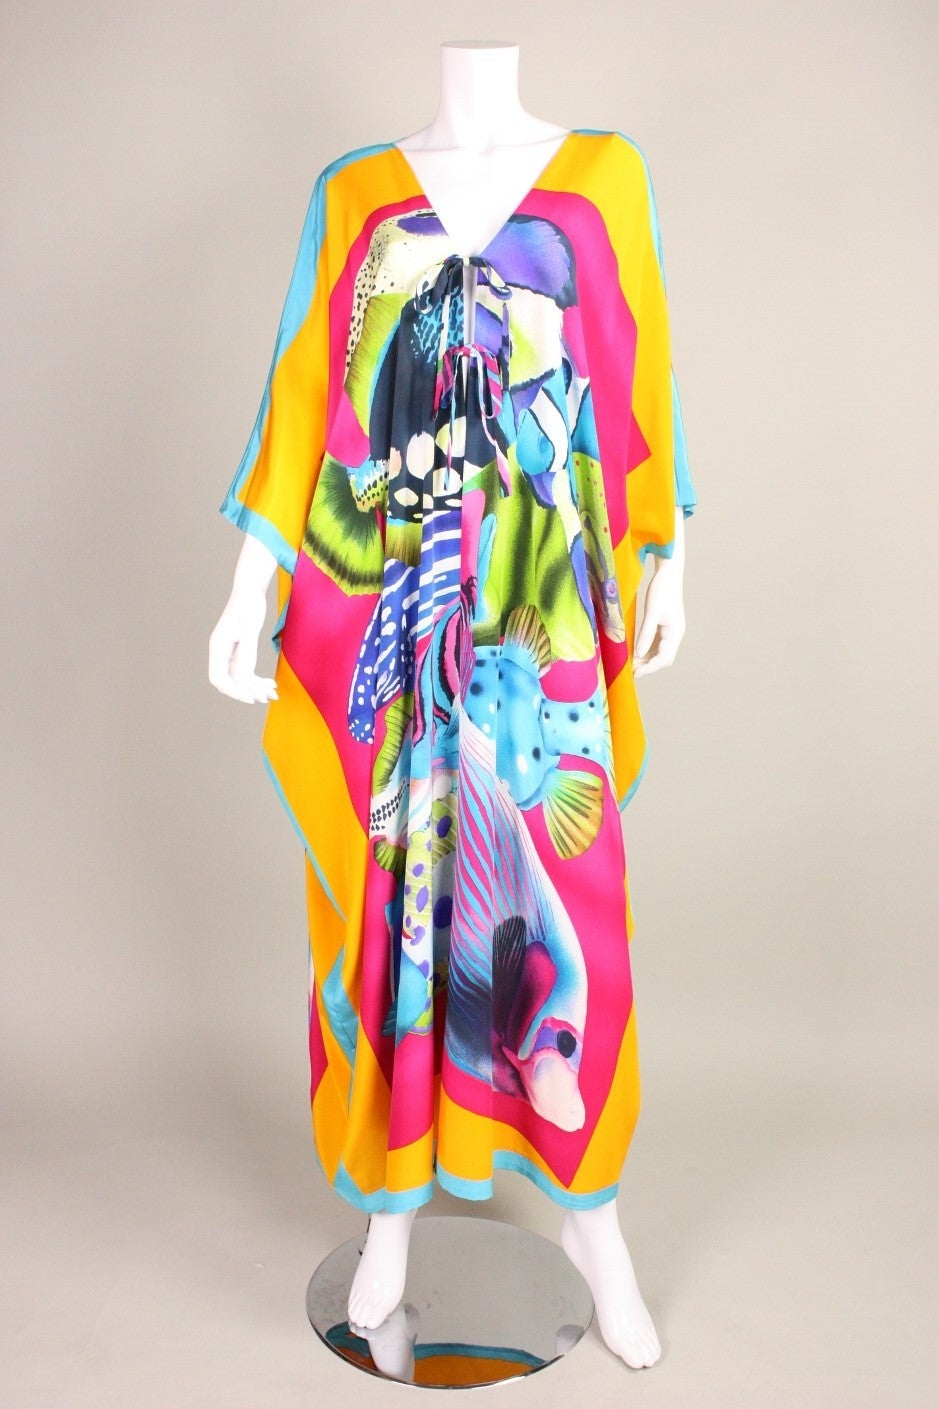 1980's Bill Blass Caftan with Fish Print.  Unlined.  Two center front ties, one at bust and one at waist.  Open other than that down center front.

Labeled size 8, but is more of a one-size fits most.